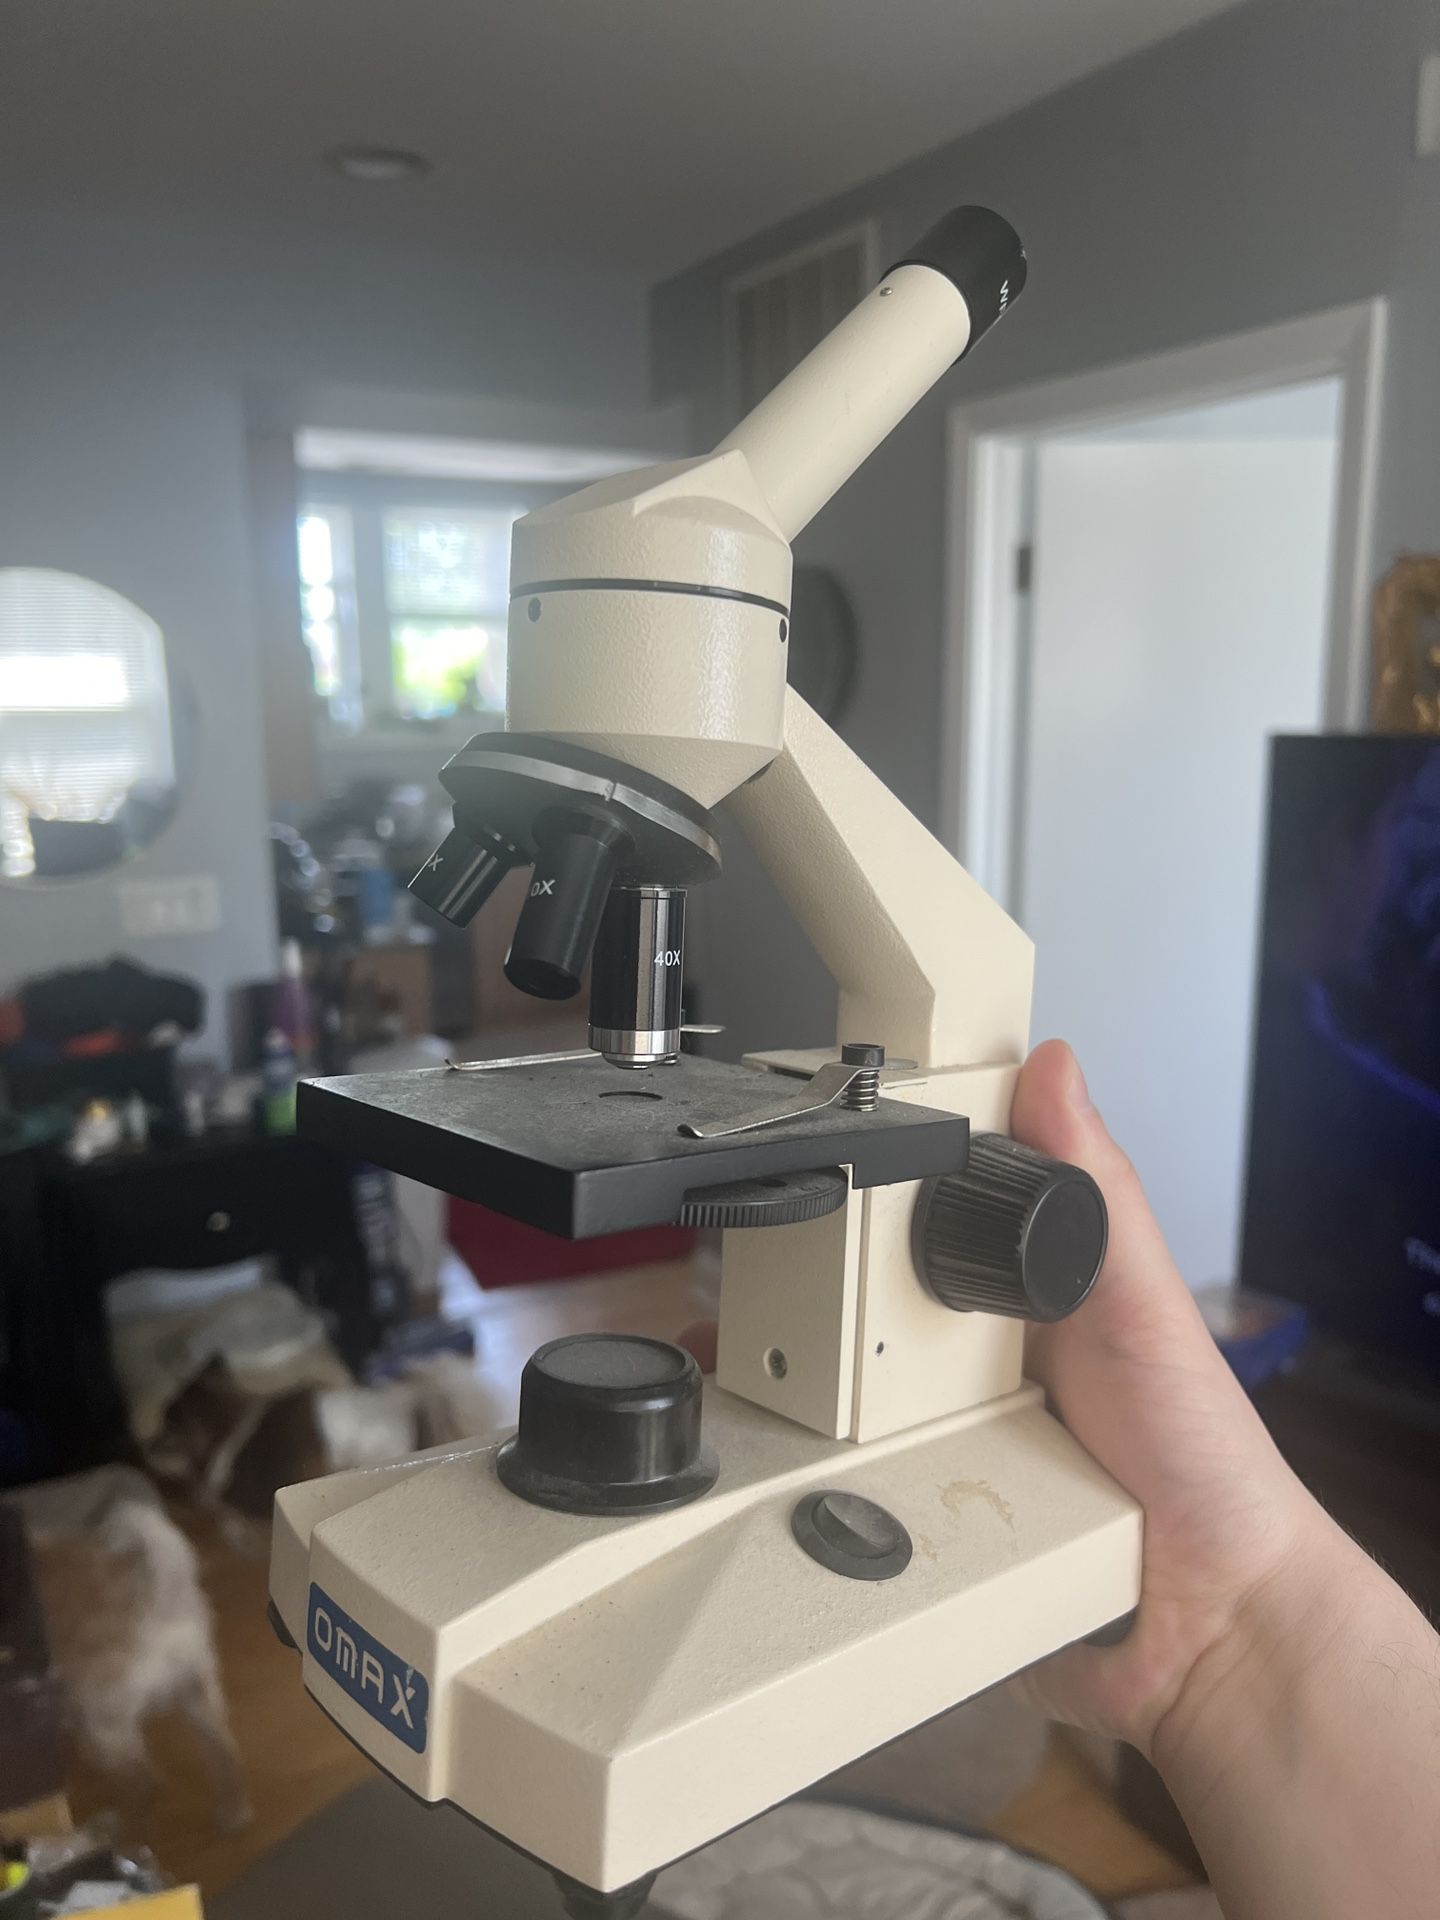 Microscope Up To 100x View